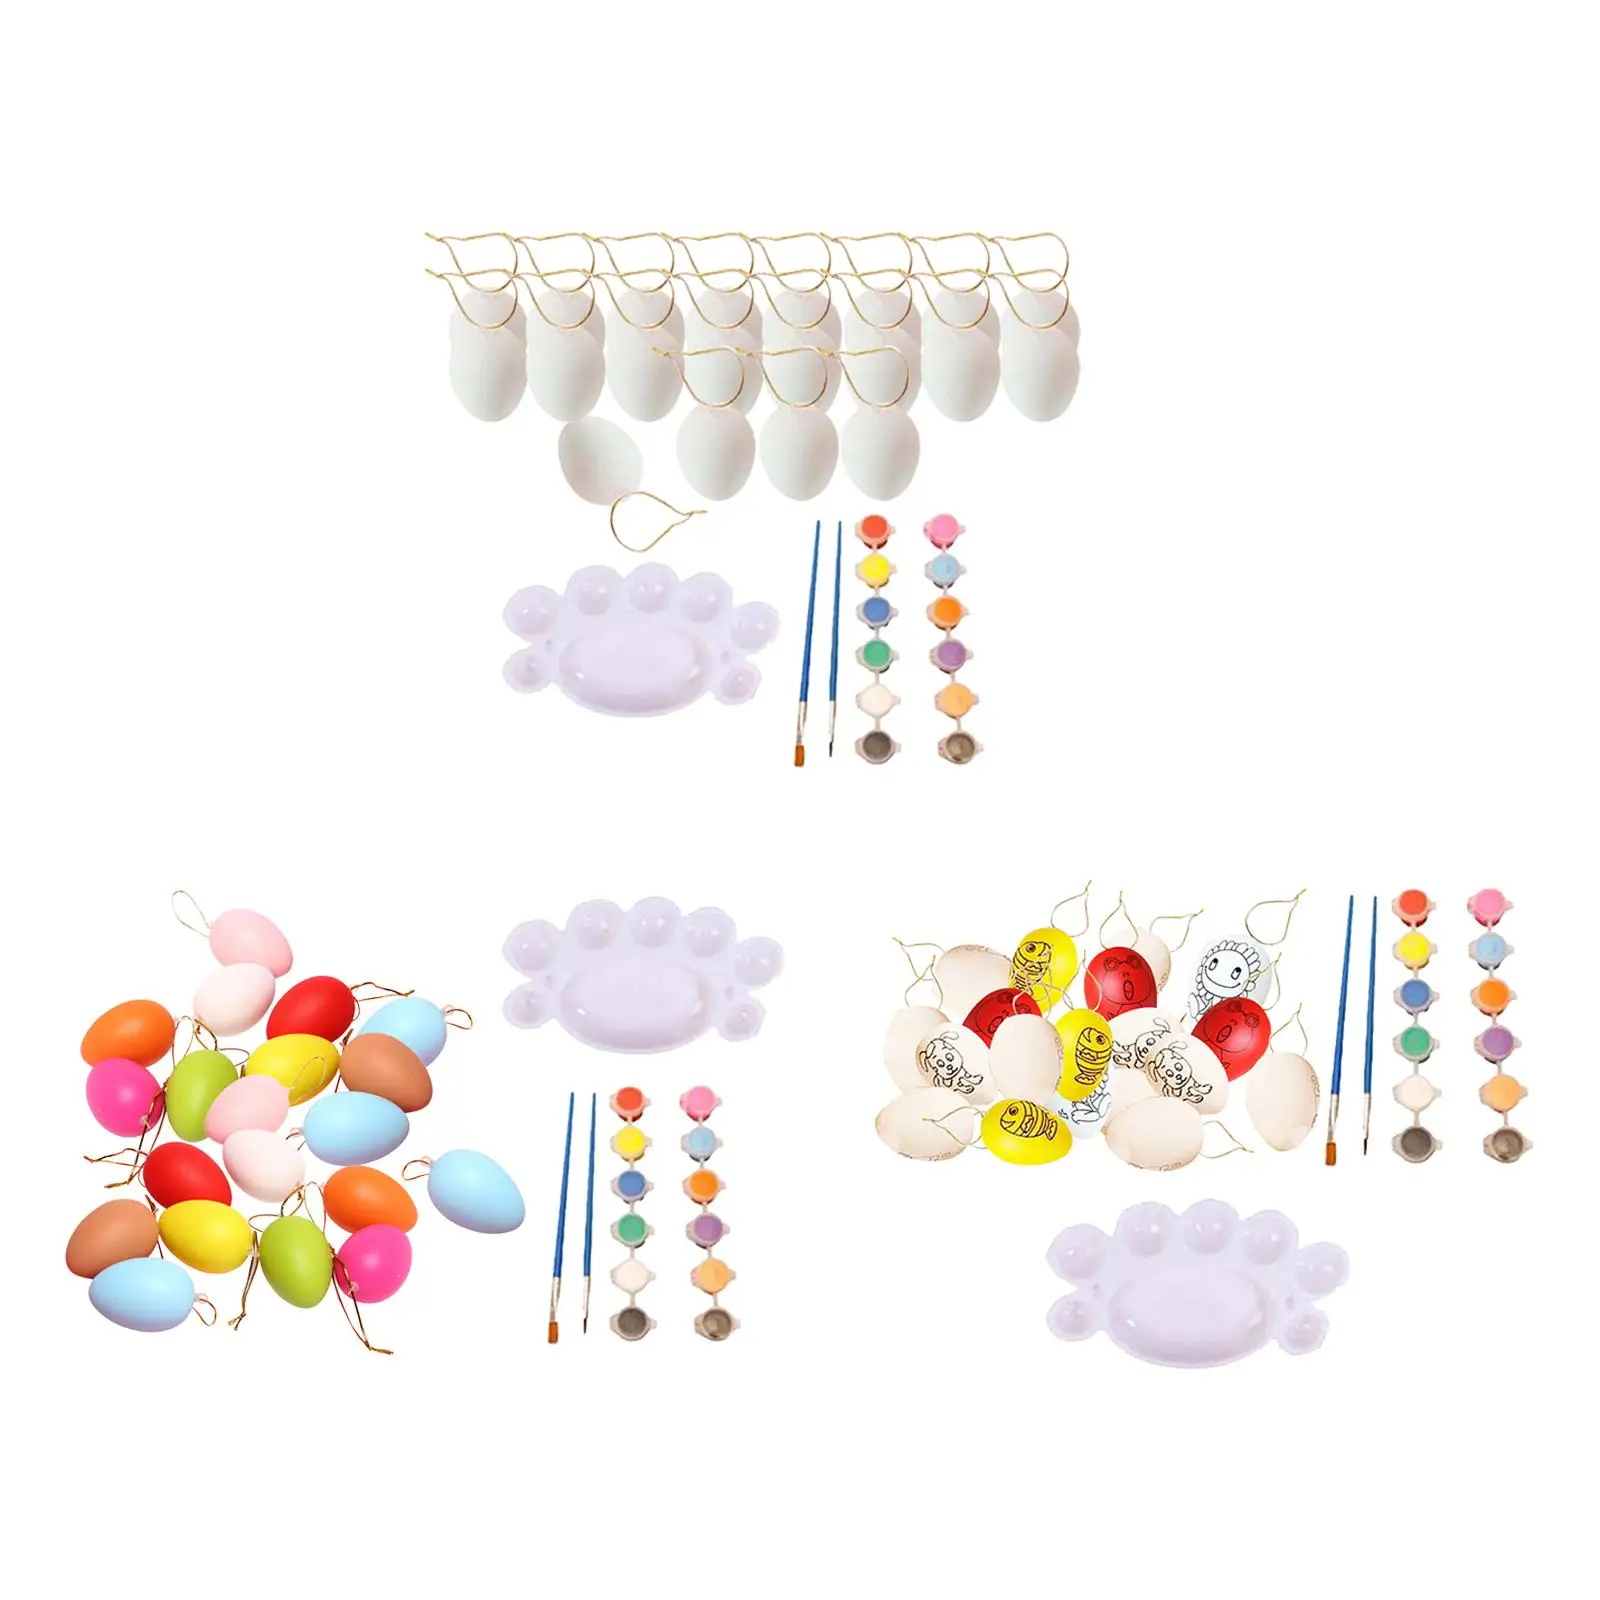 20 pieces of white Easter eggs painting with 12 color pigments and brush